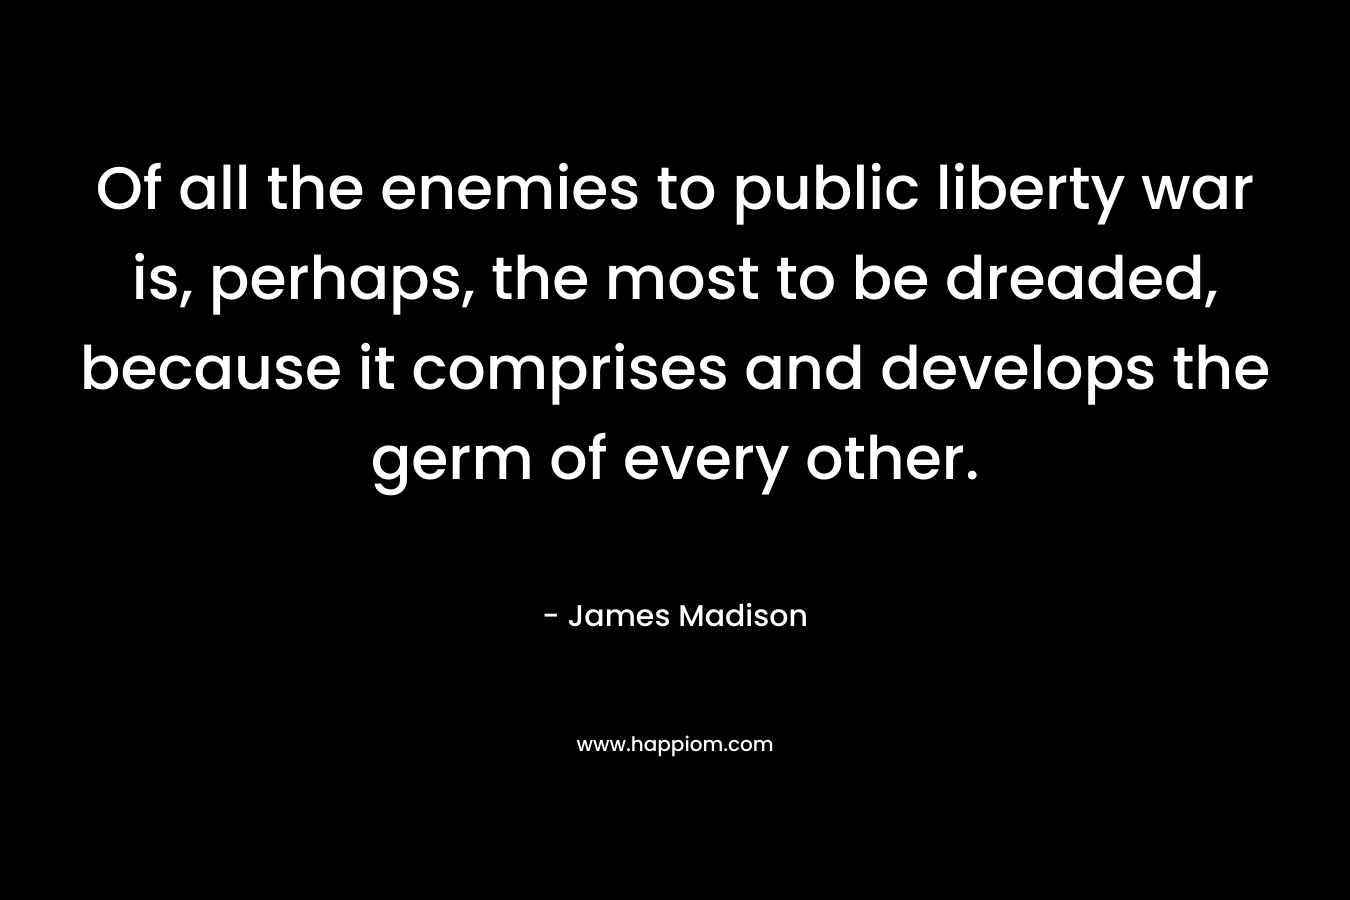 Of all the enemies to public liberty war is, perhaps, the most to be dreaded, because it comprises and develops the germ of every other. – James Madison